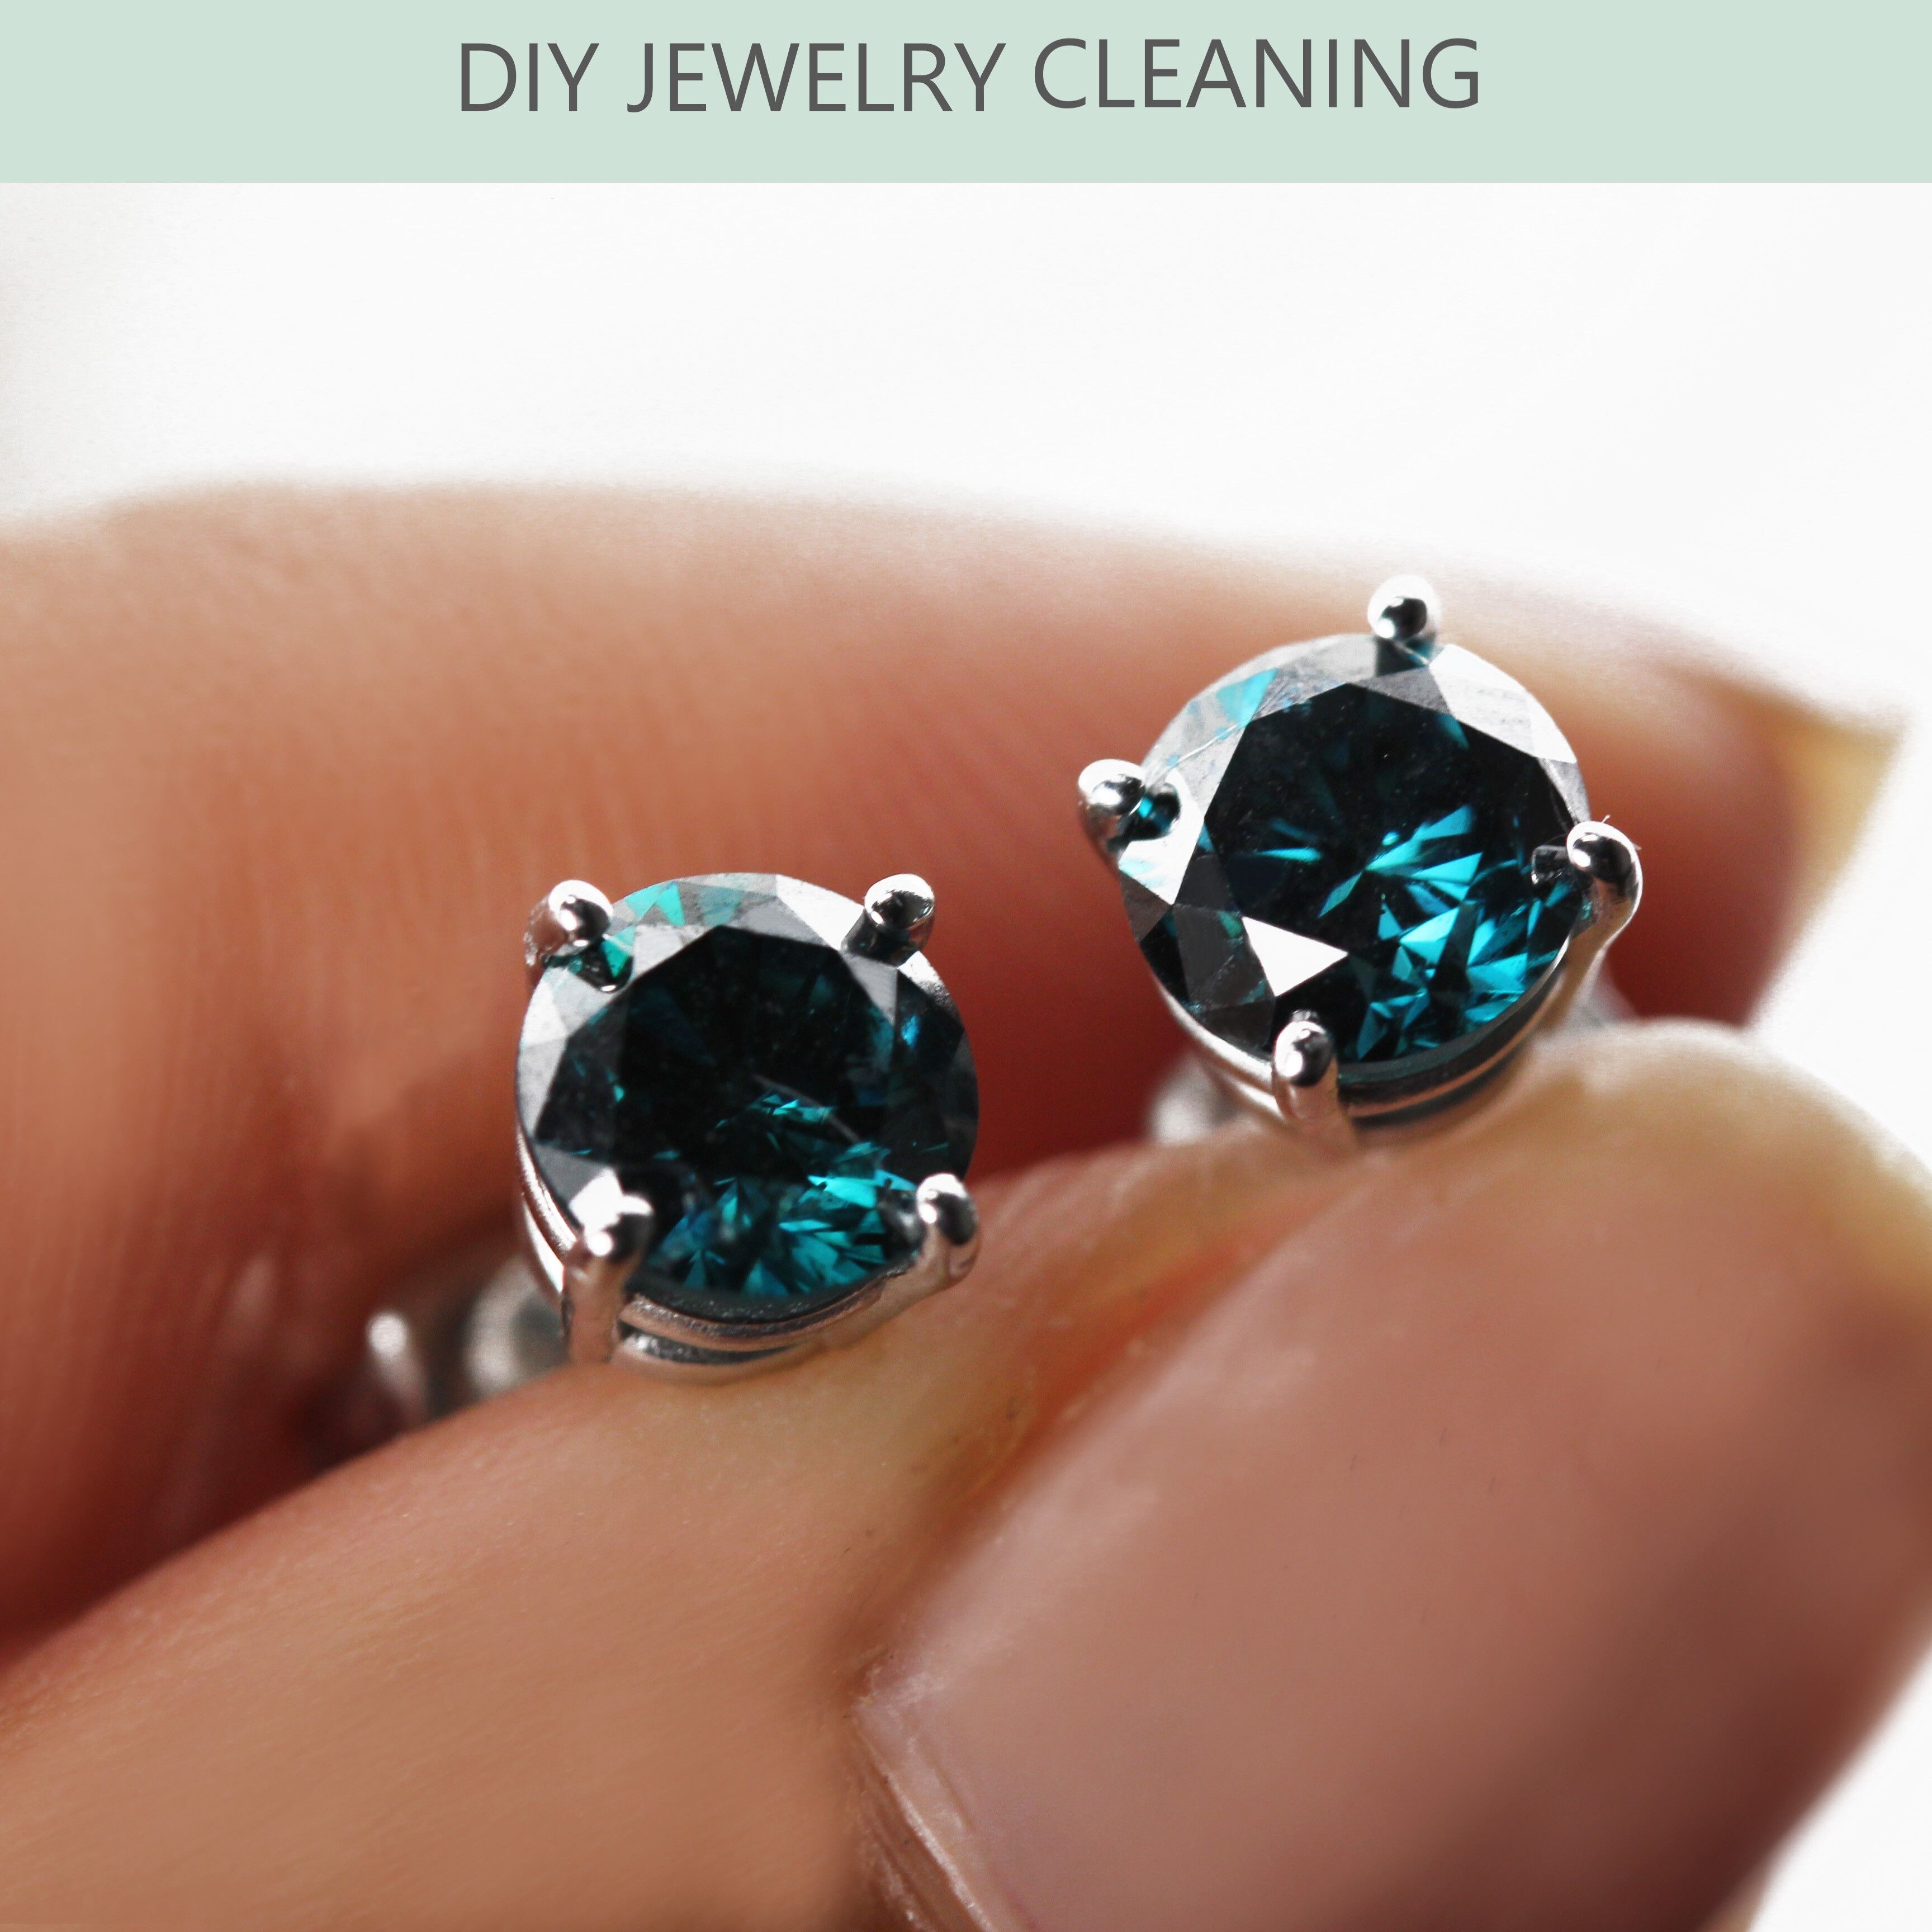 How to Clean Your Diamond Jewelry at home and with an expert